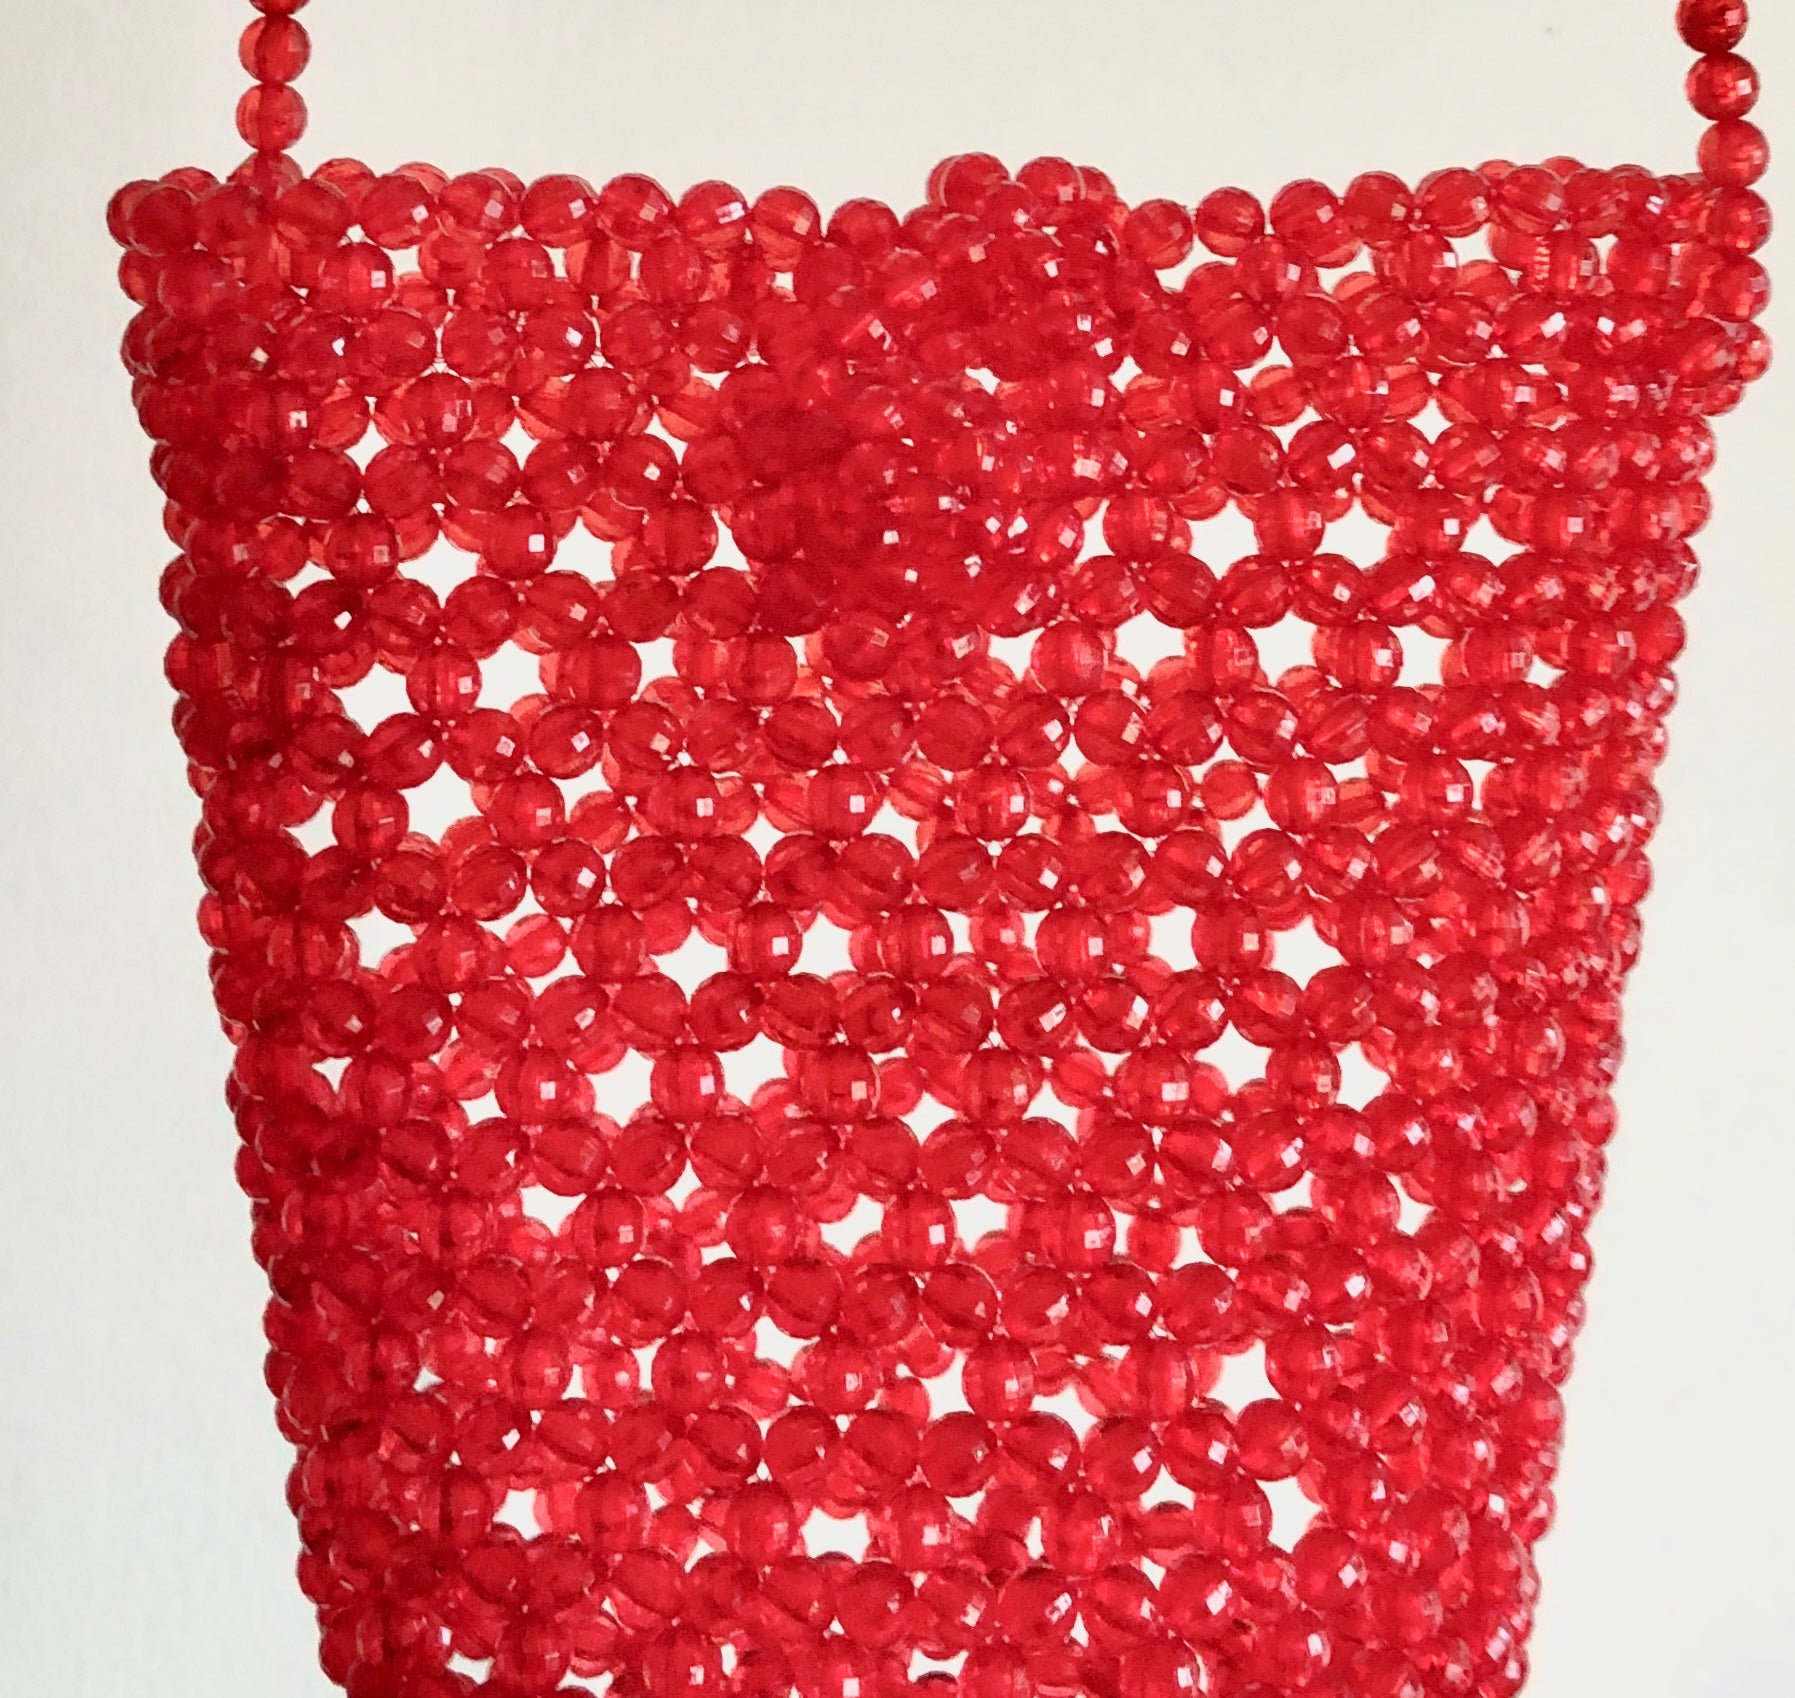 The Cher Beaded Bucket Bag by Veronique